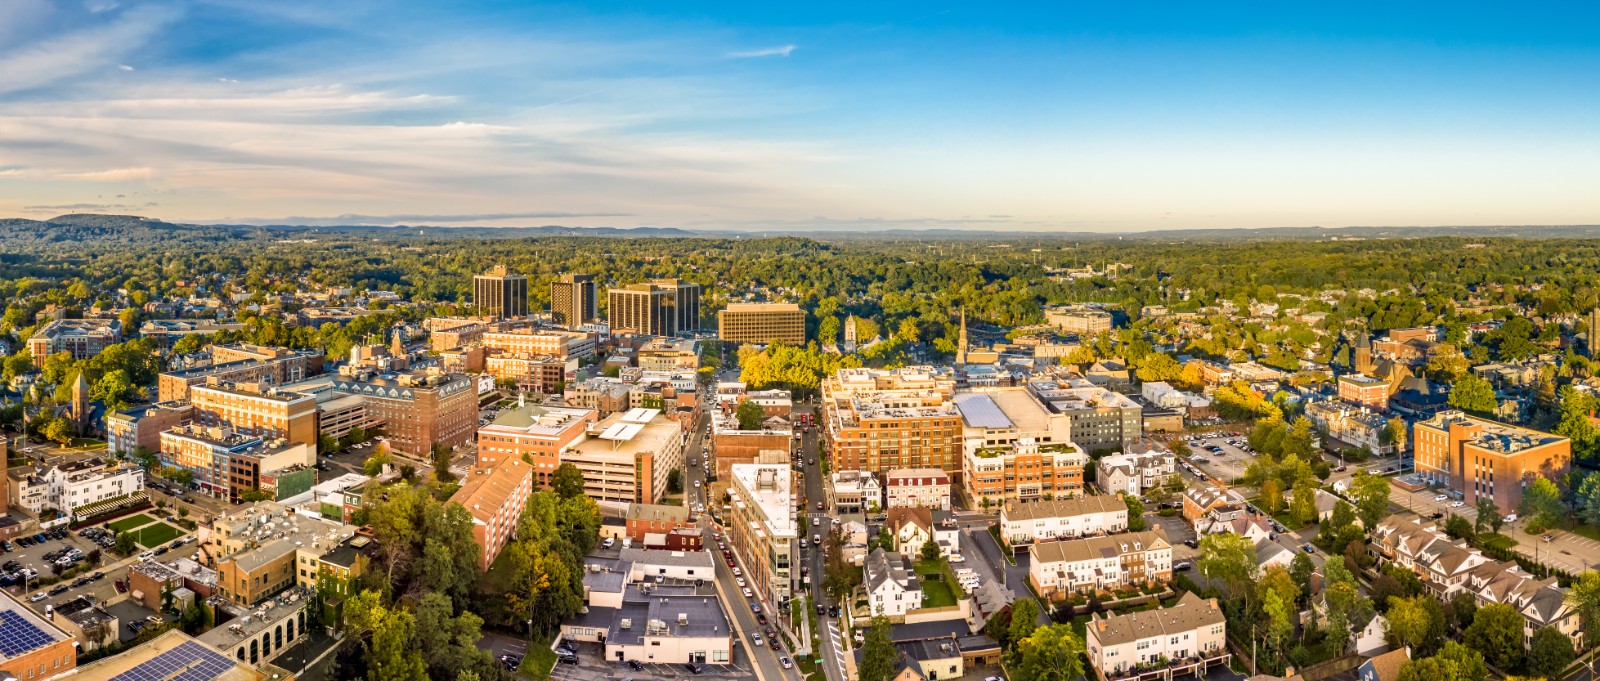 An aerial photograph of Morristown, NJ.